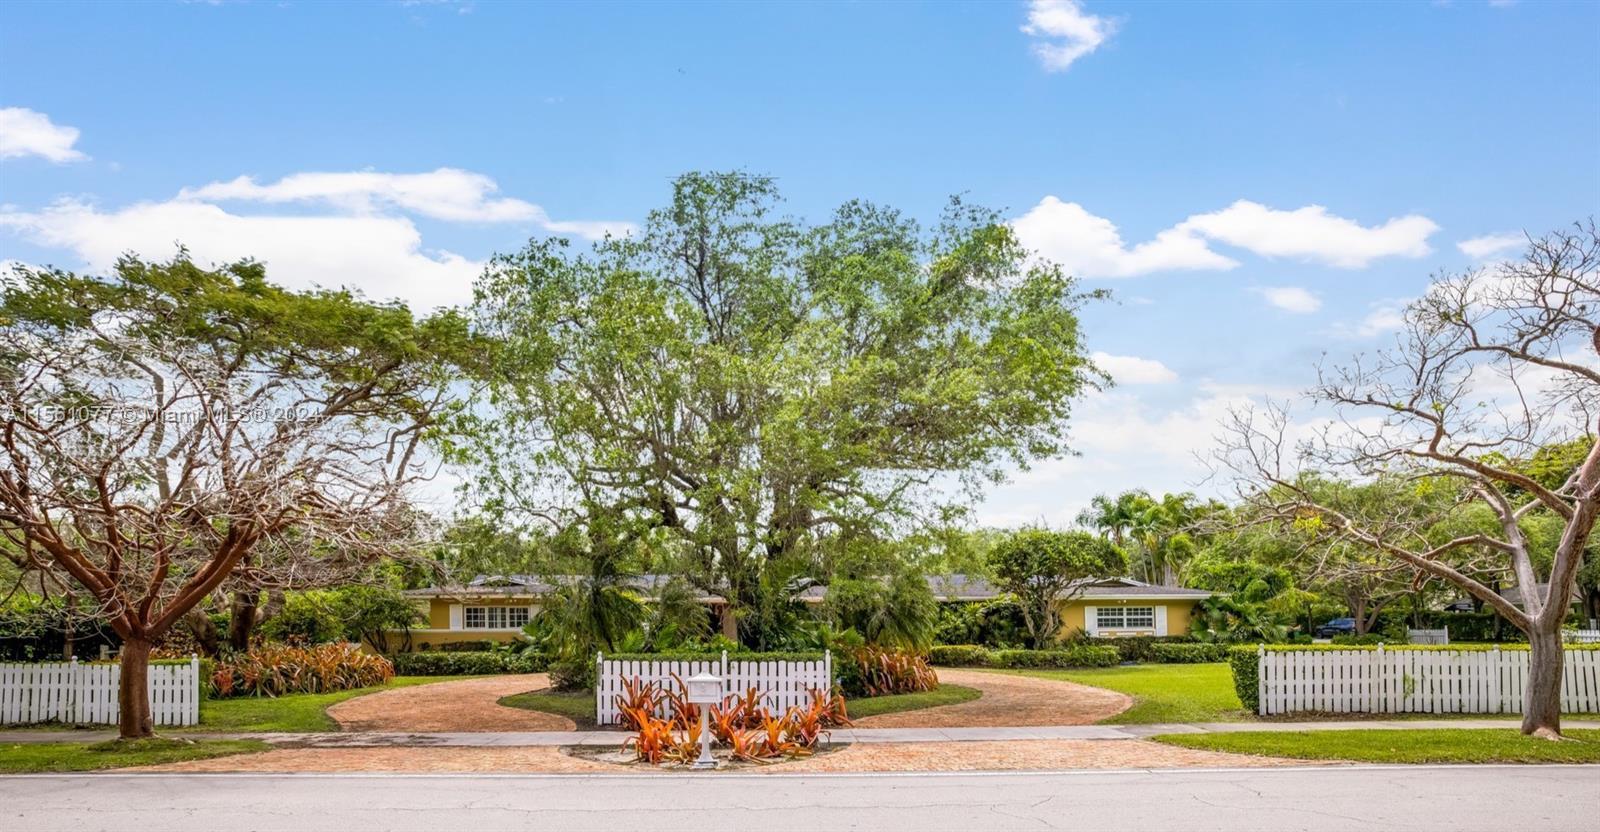 The perfect family home, sitting on an oversized 32,000+ sf. CORNER lot in the heart of Pinecrest. Y